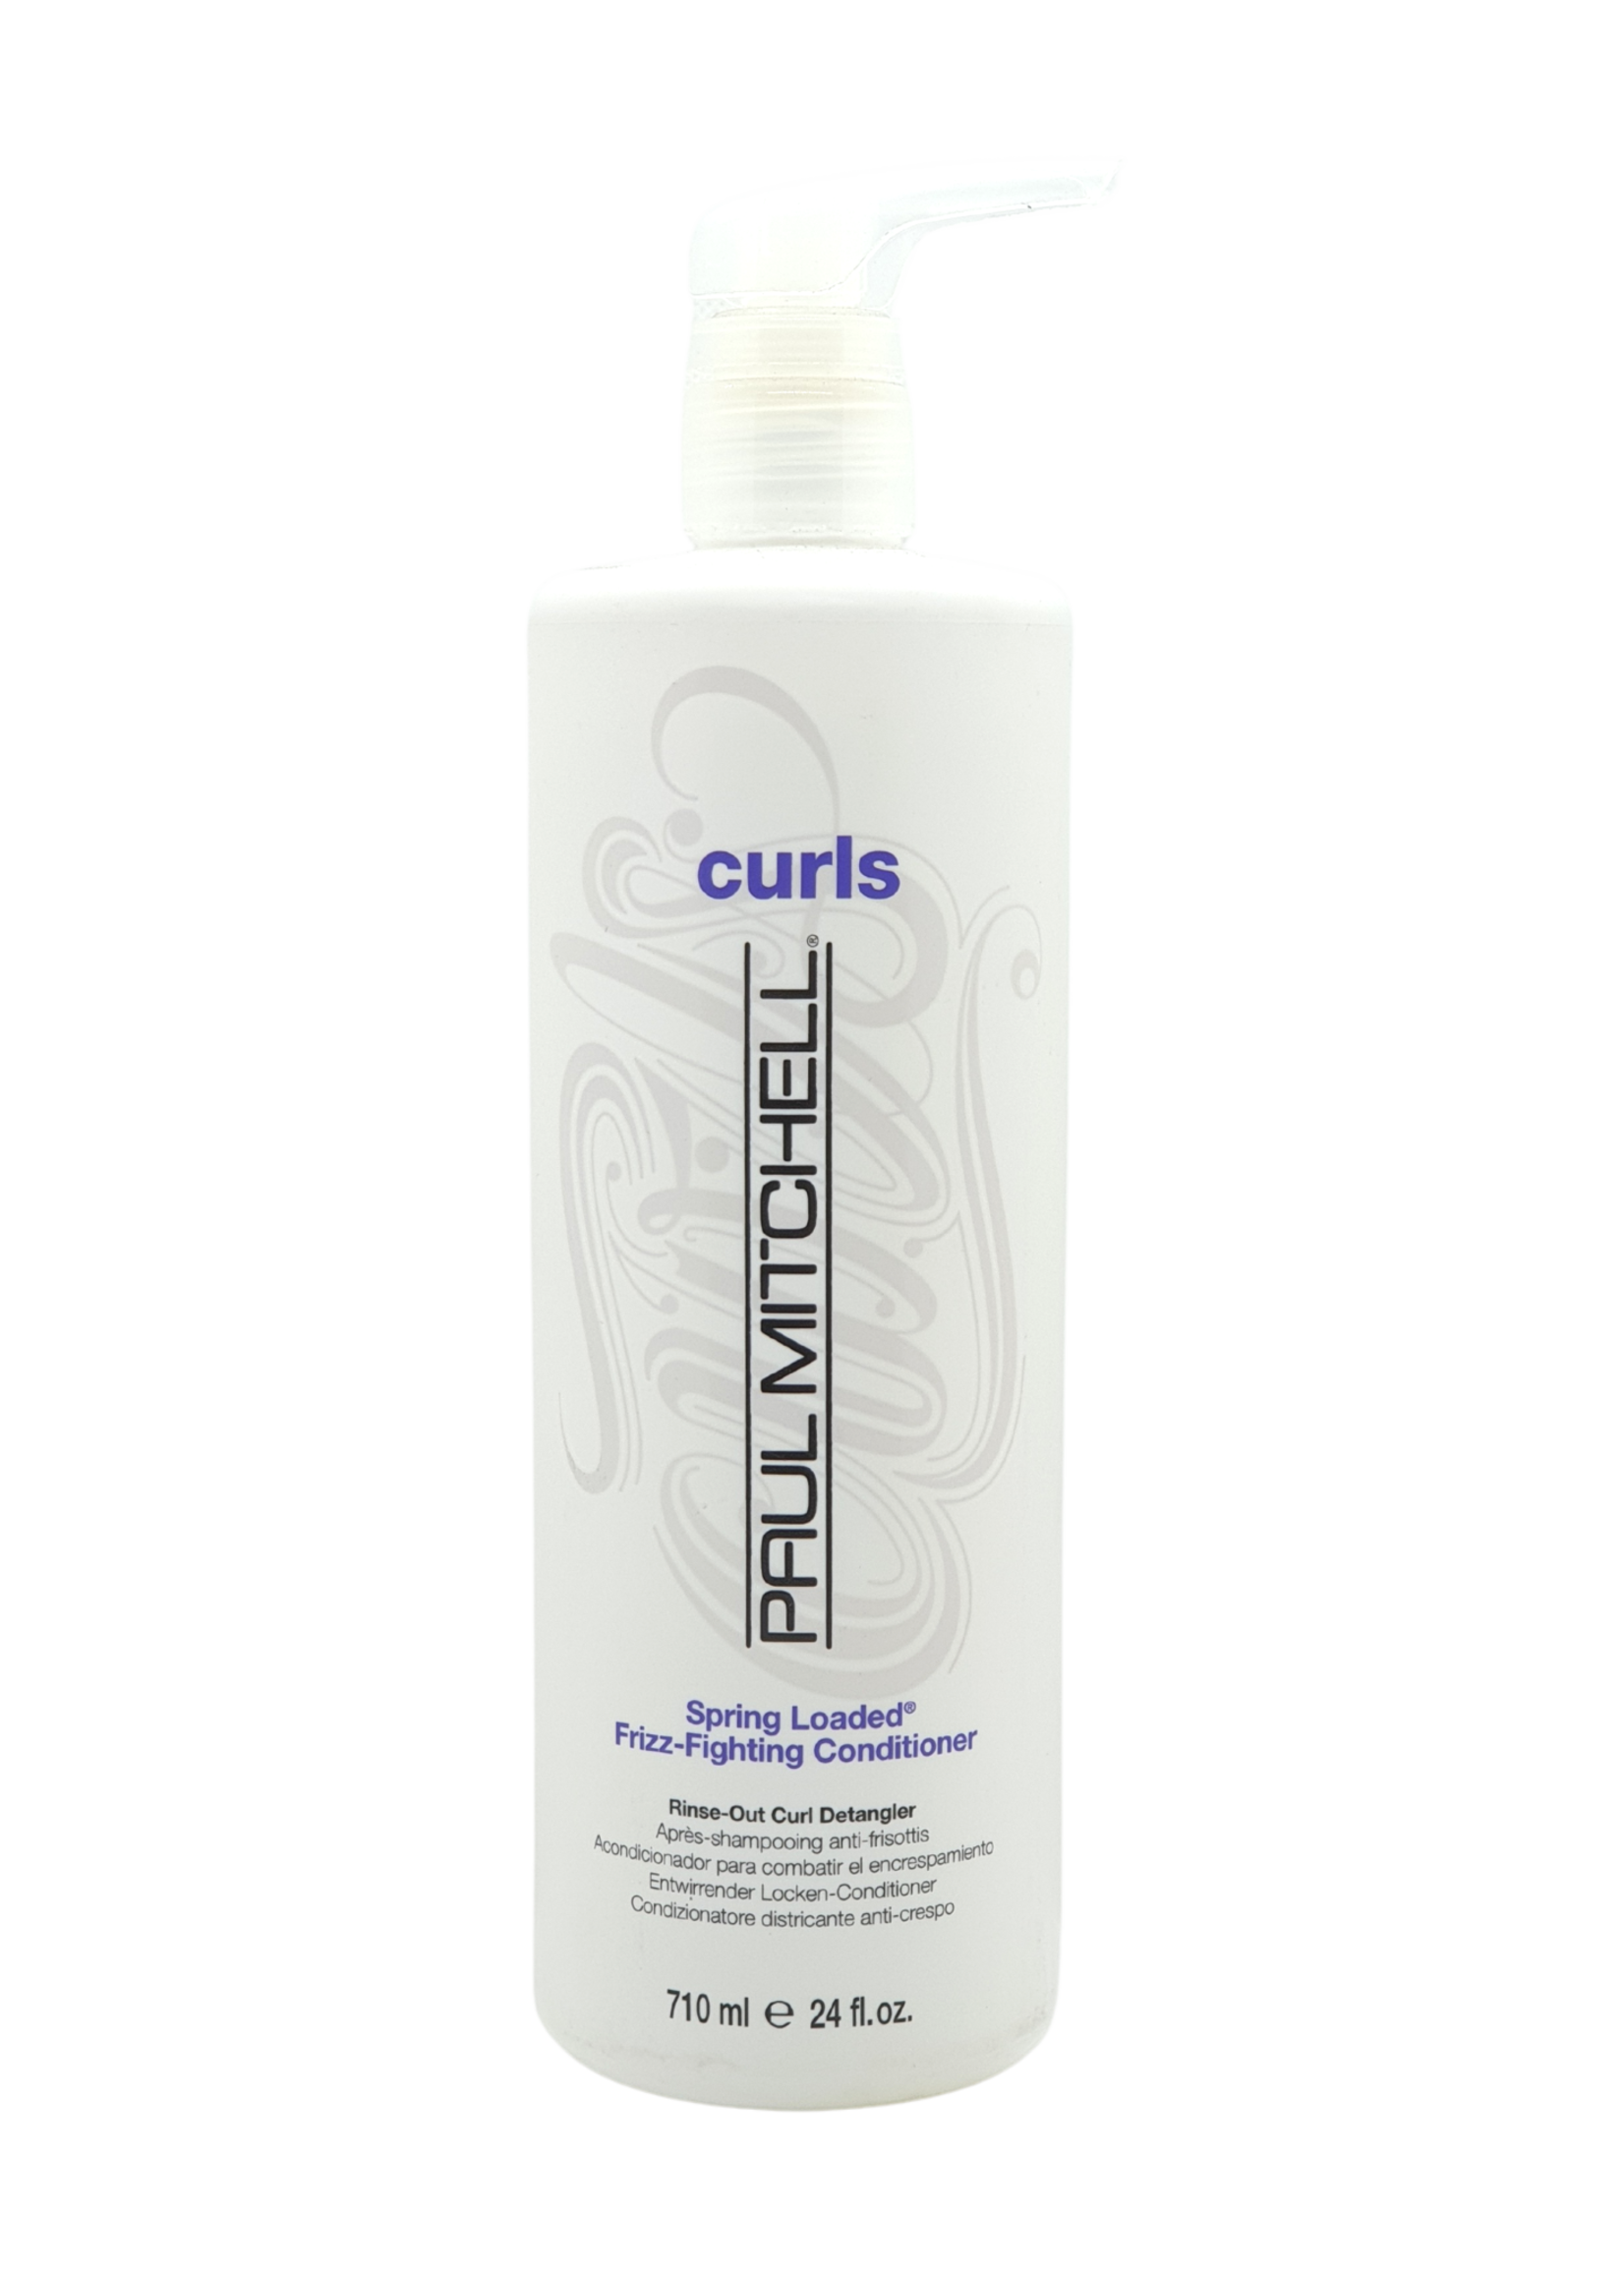 Paul Mitchell Paul Mitchell Curls Spring Loaded Frizz-Fighting Conditioner 710ml